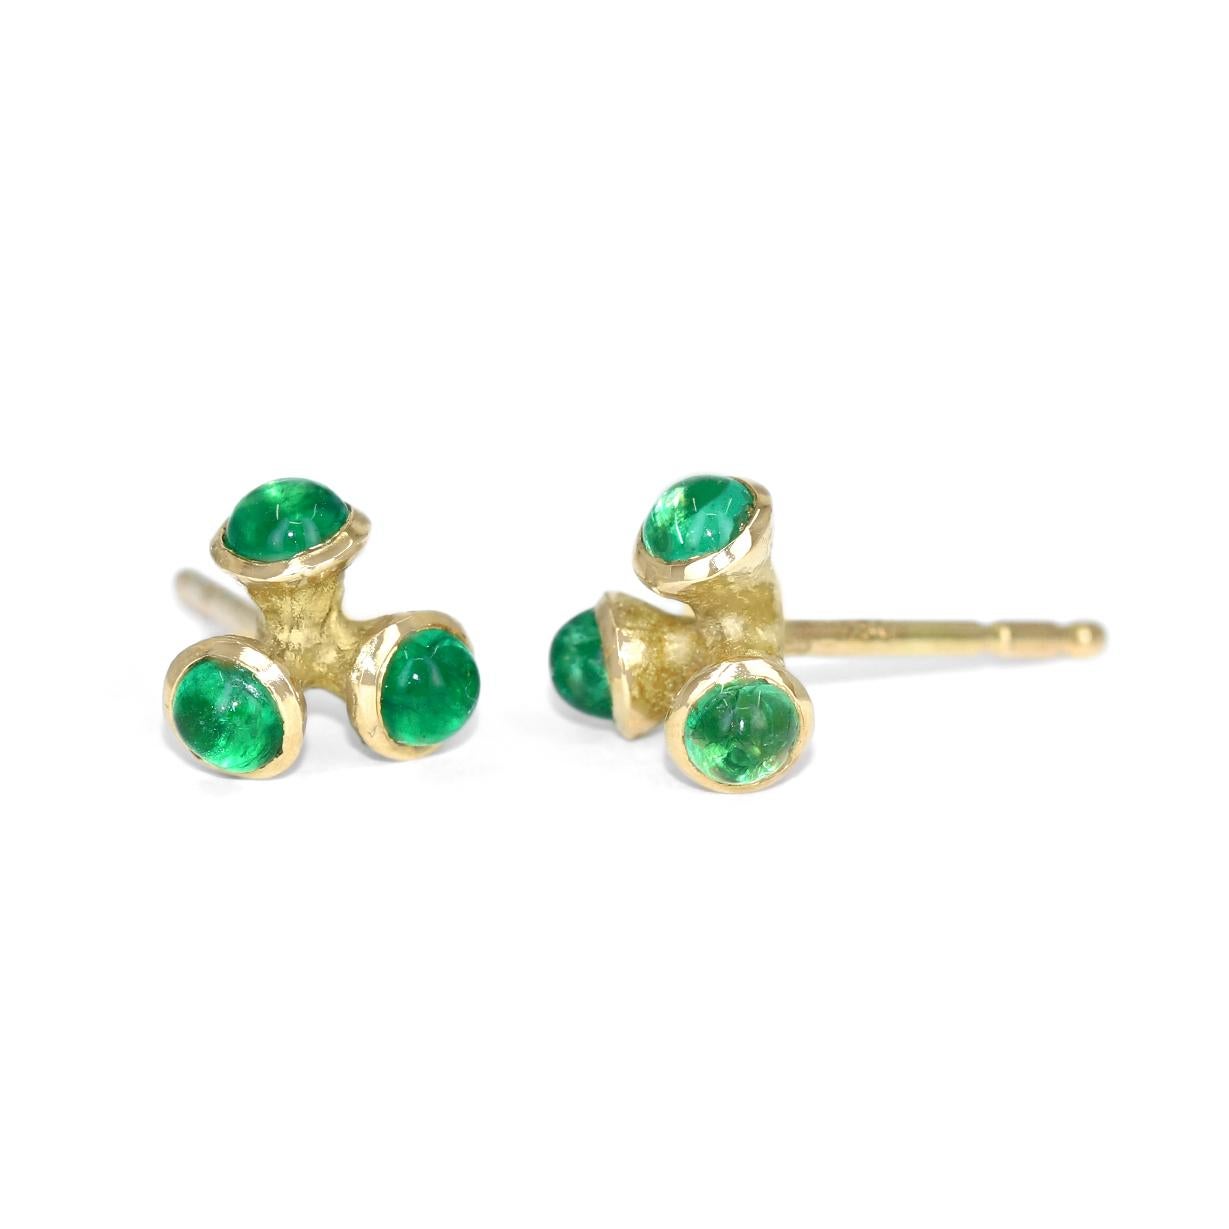 One of a Kind Tiny Jacks Earrings hand-fabricated by award-winning, globally acclaimed jewelry maker John Iversen in signature-finished 18k yellow gold featuring six perfectly matched natural round emerald cabochons. Finished with 14k yellow gold